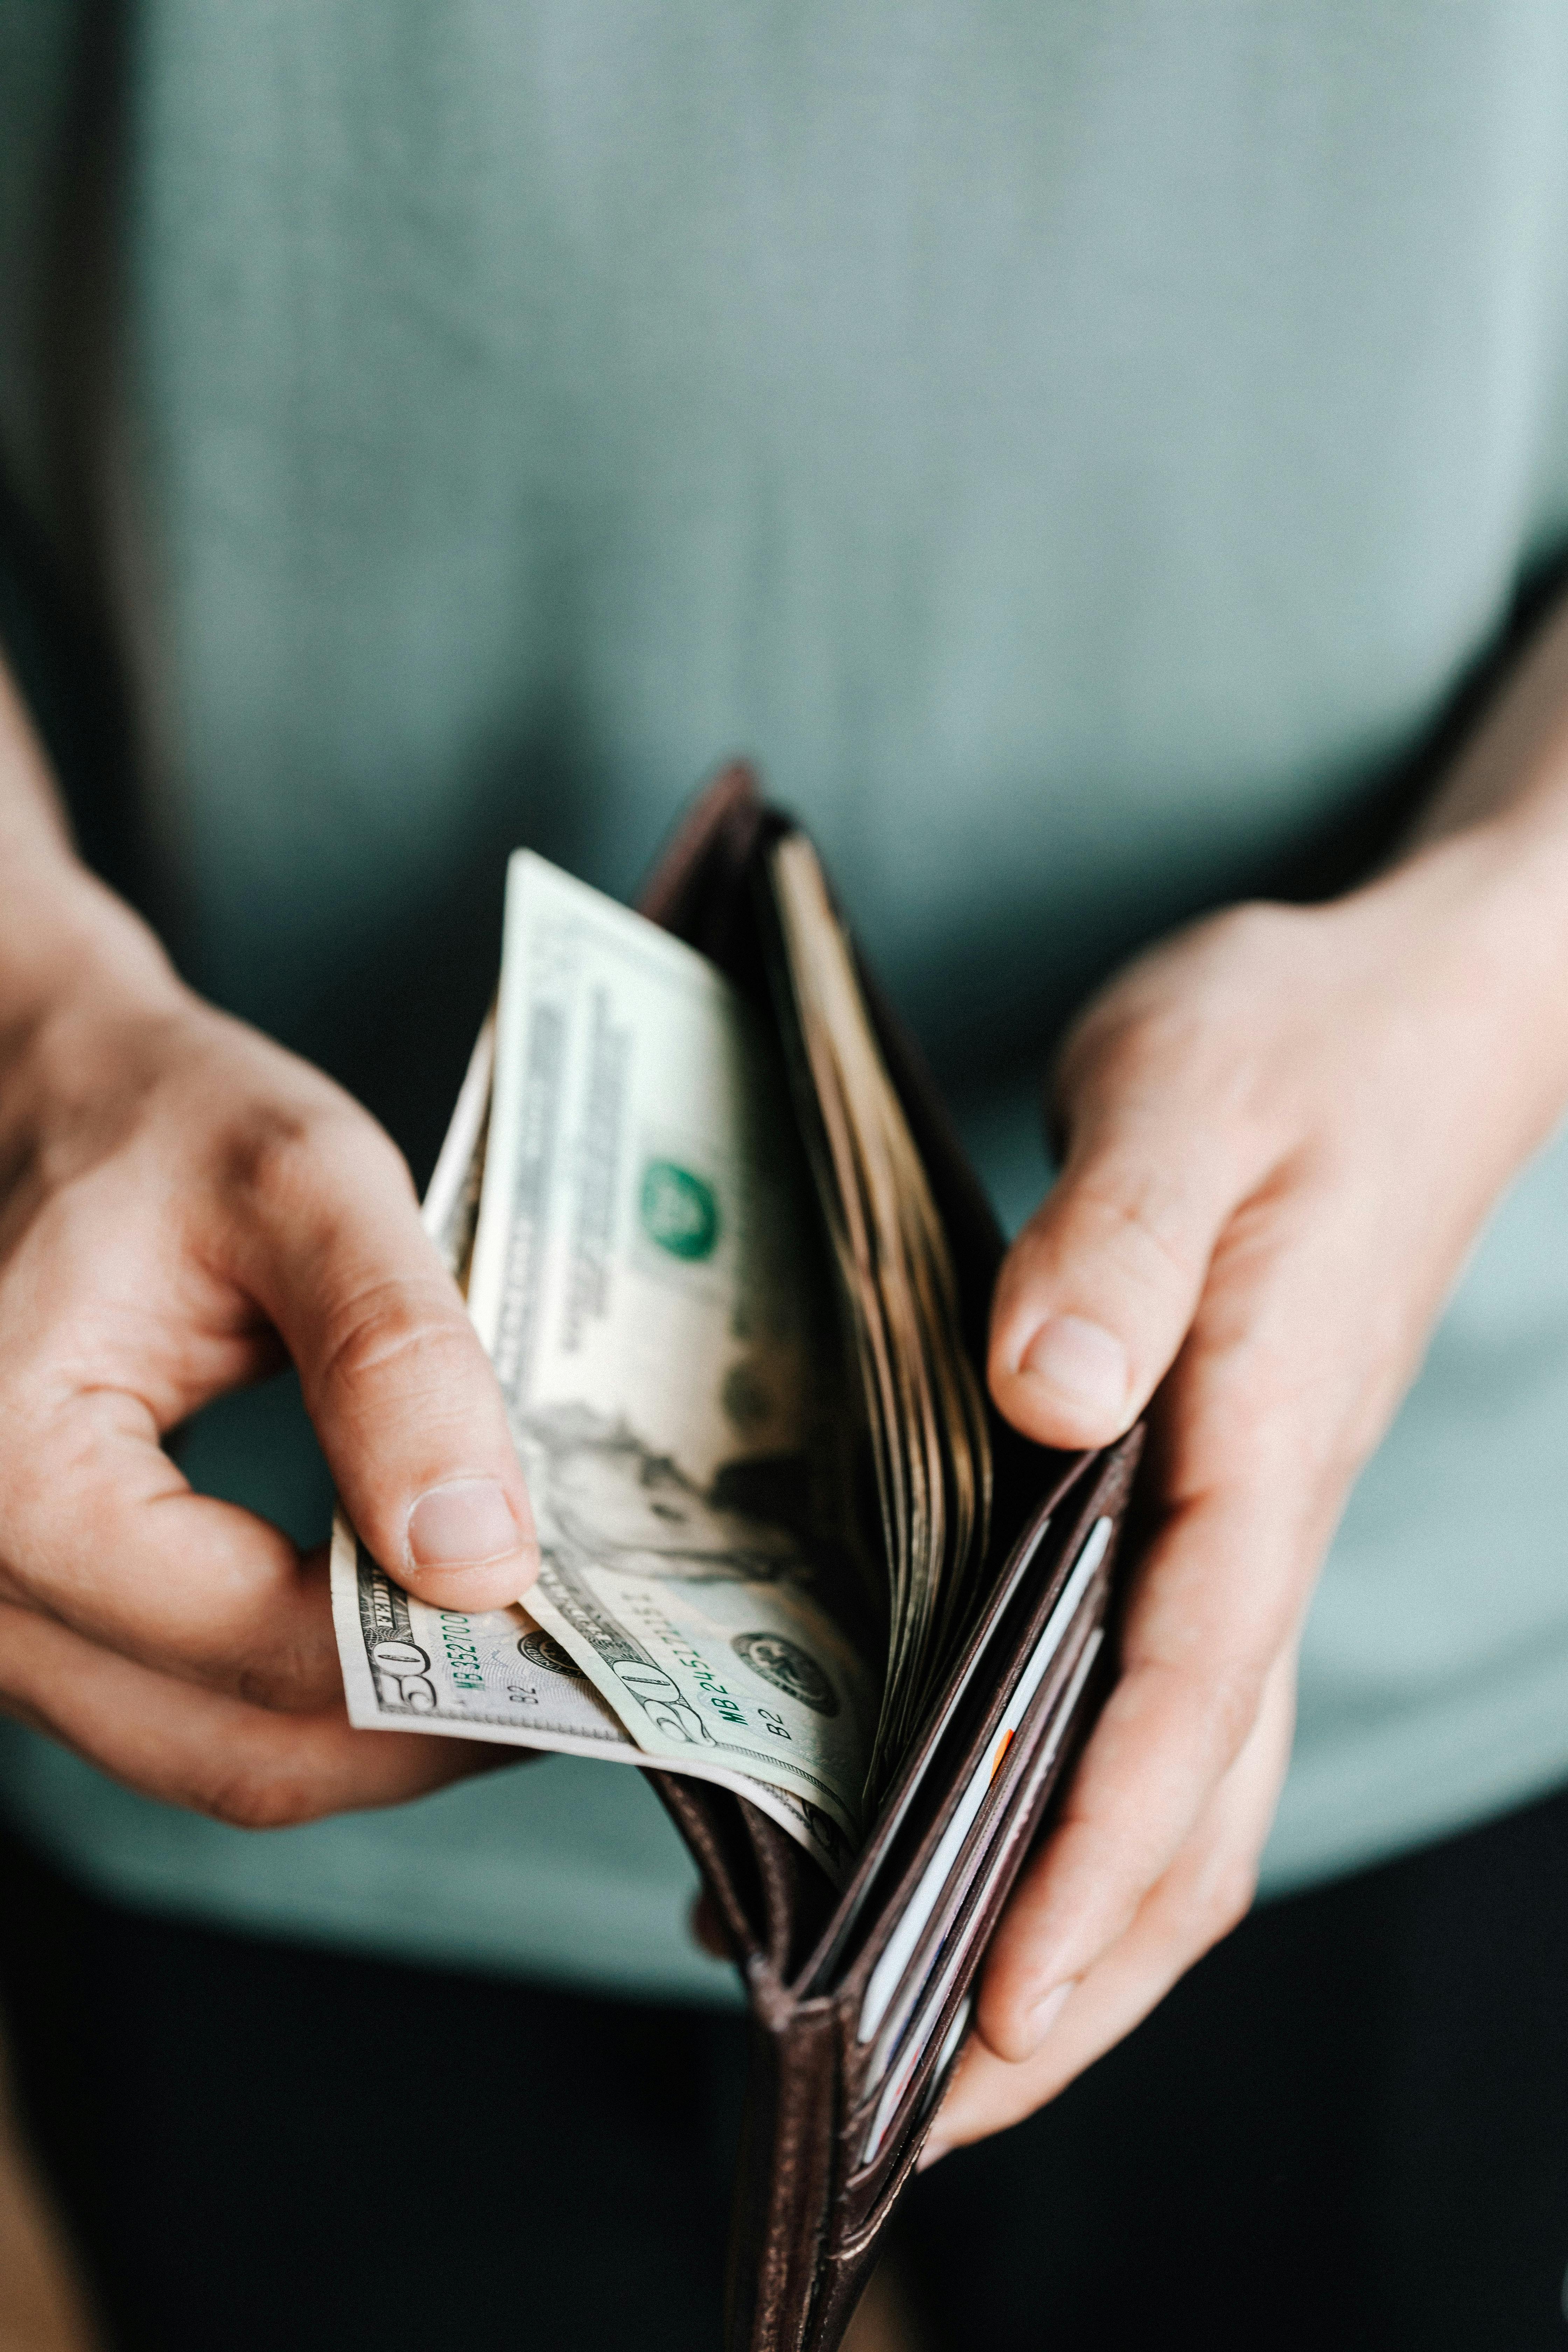 A man getting money from his wallet | Source: Pexels